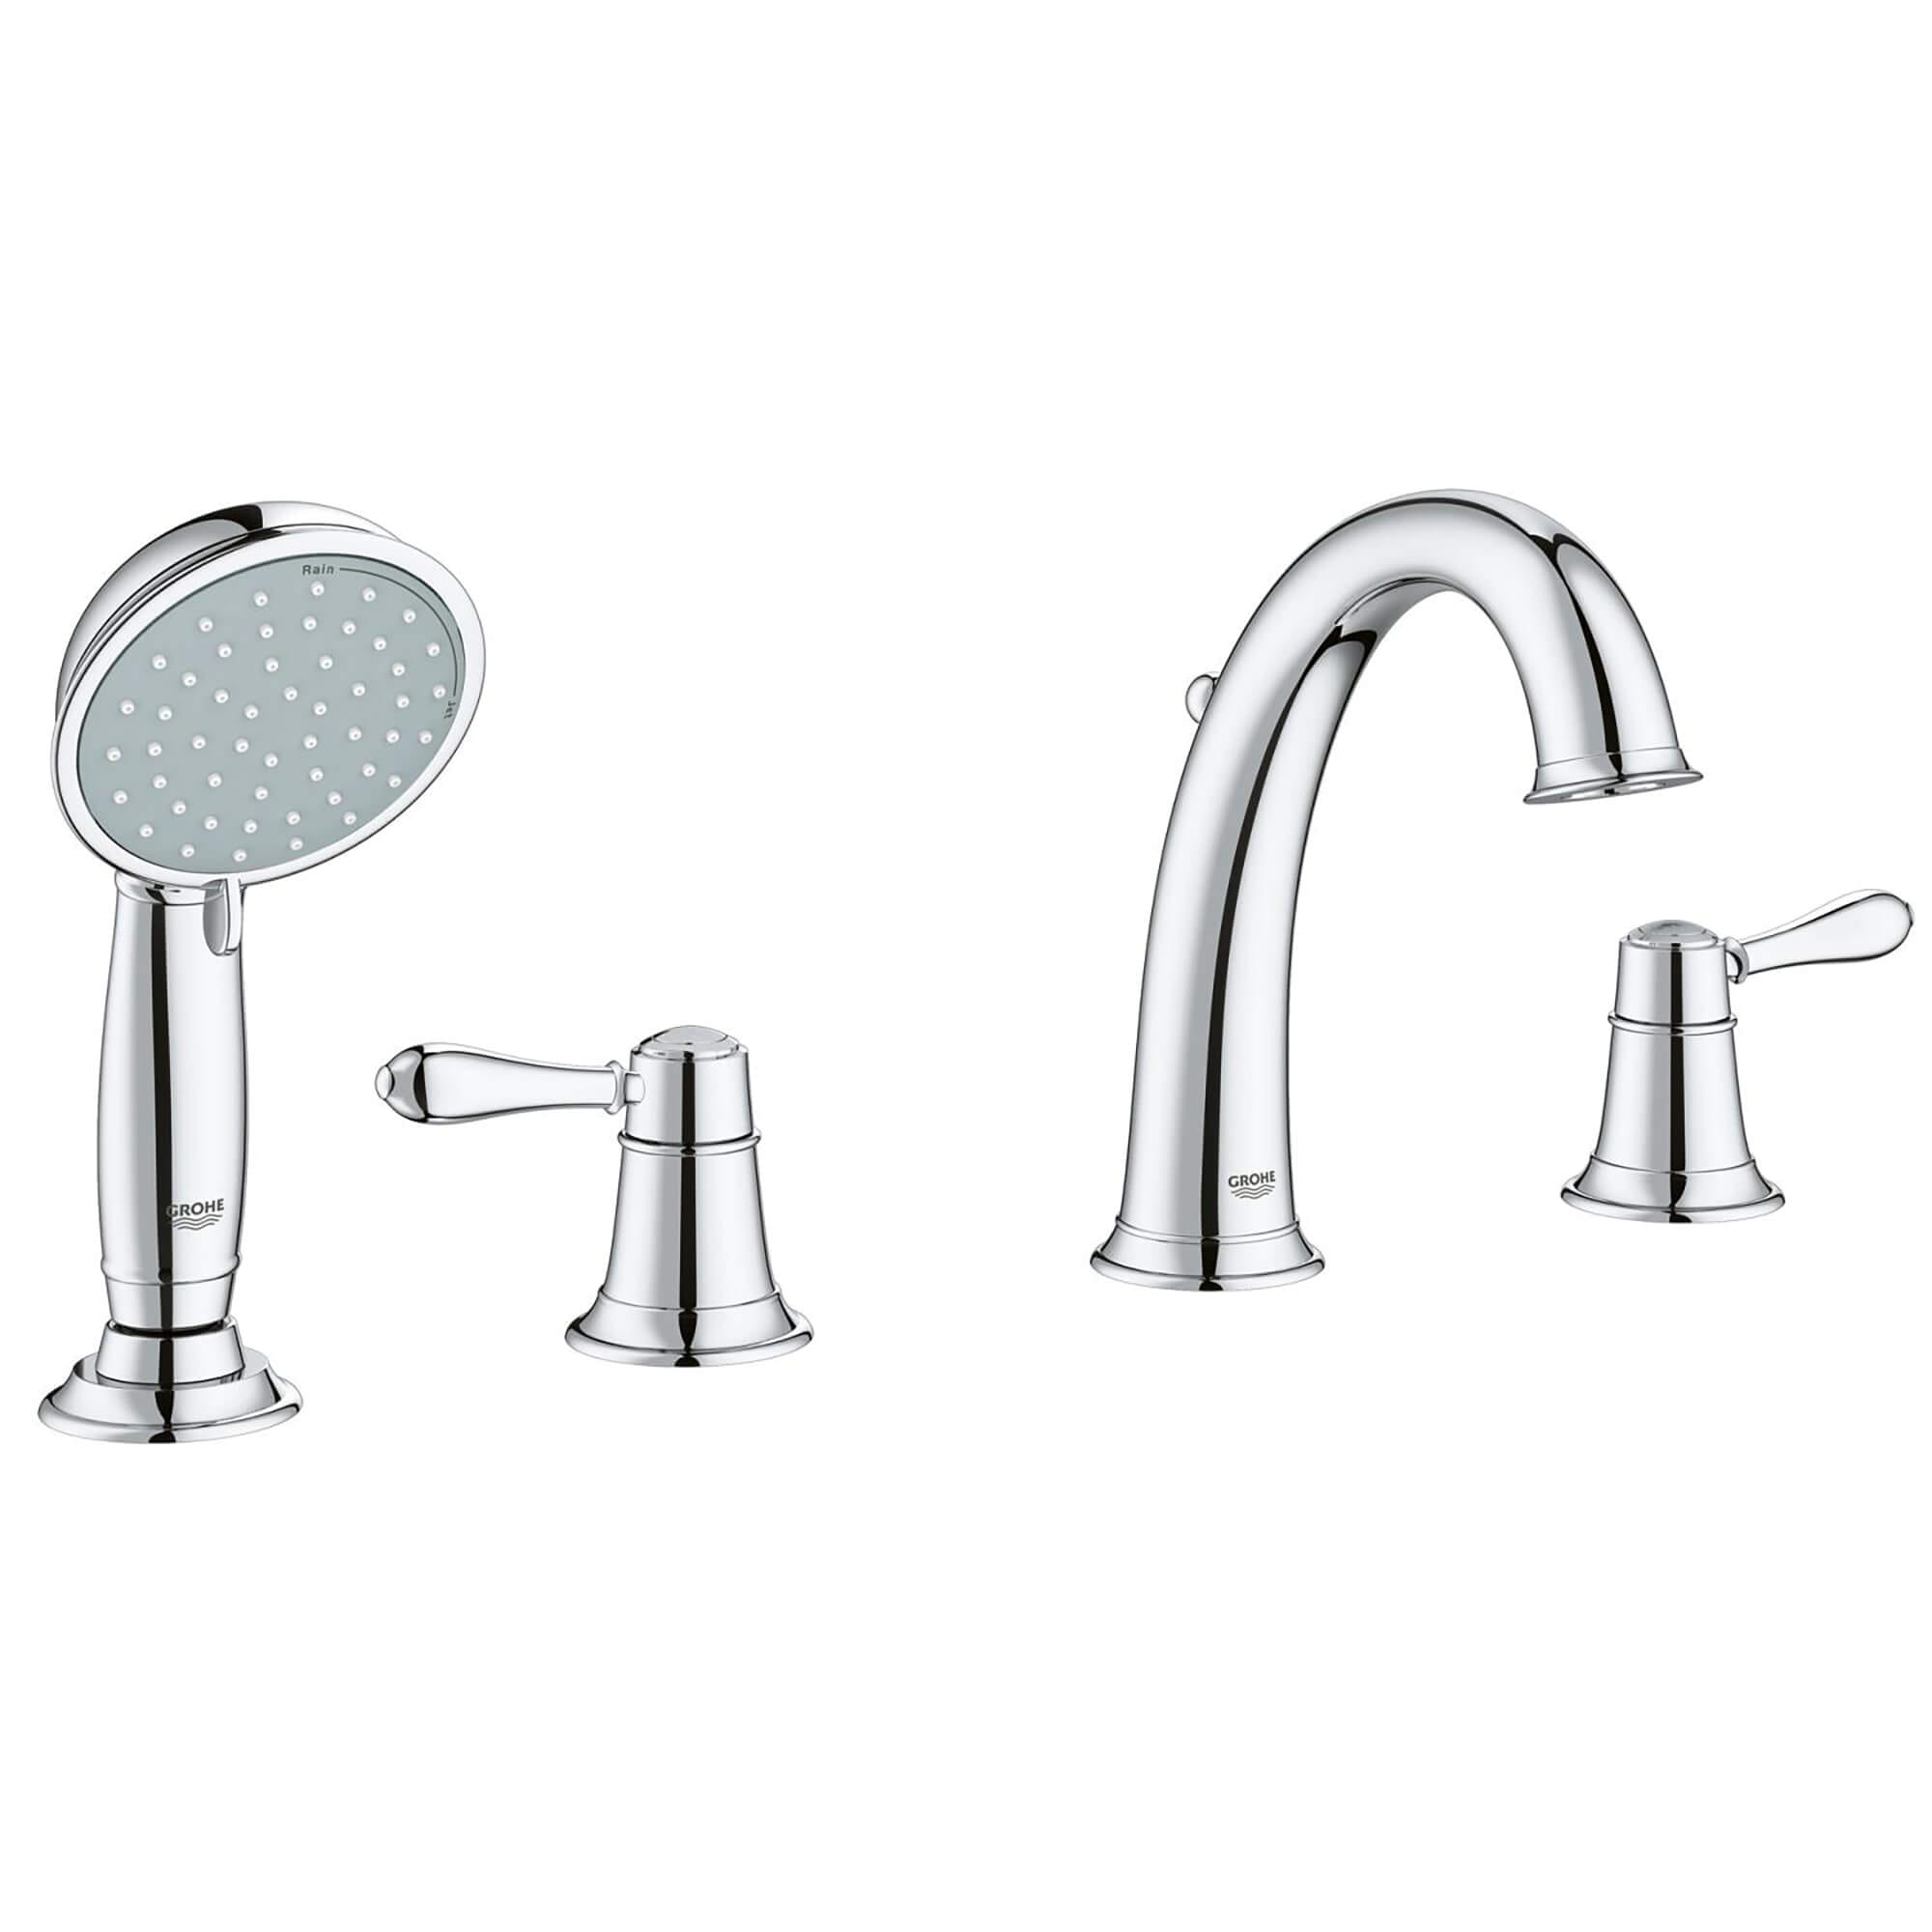 4-Hole 2-Handle Deck Mount Roman Tub Faucet with 2.0 GPM Hand Shower